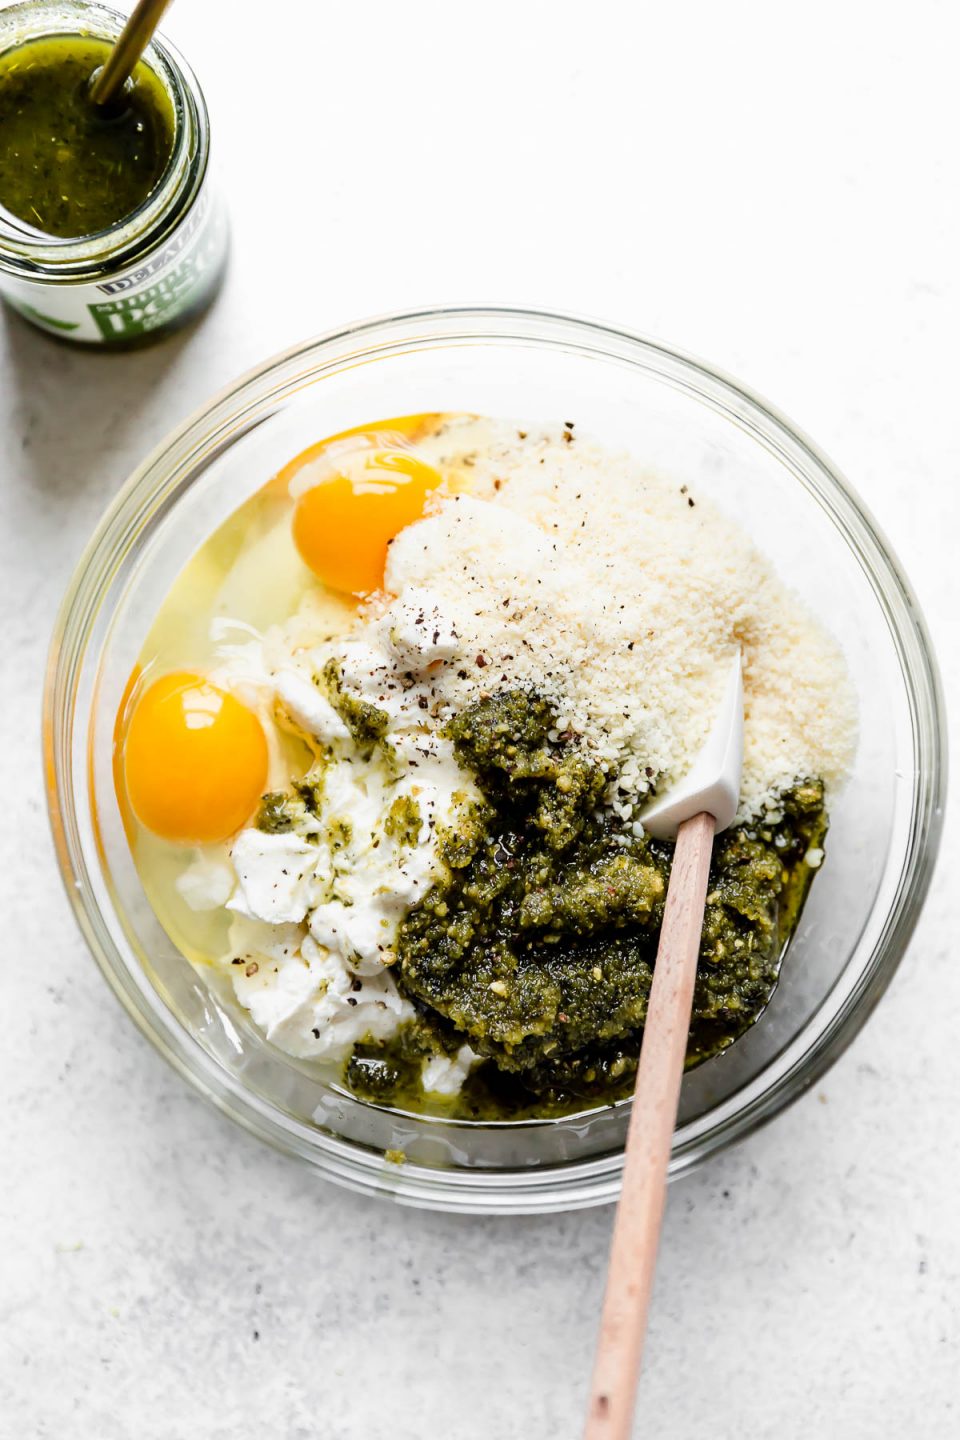 Pesto, Ricotta, Eggs & Parmesan cheese in a mixing bowl.